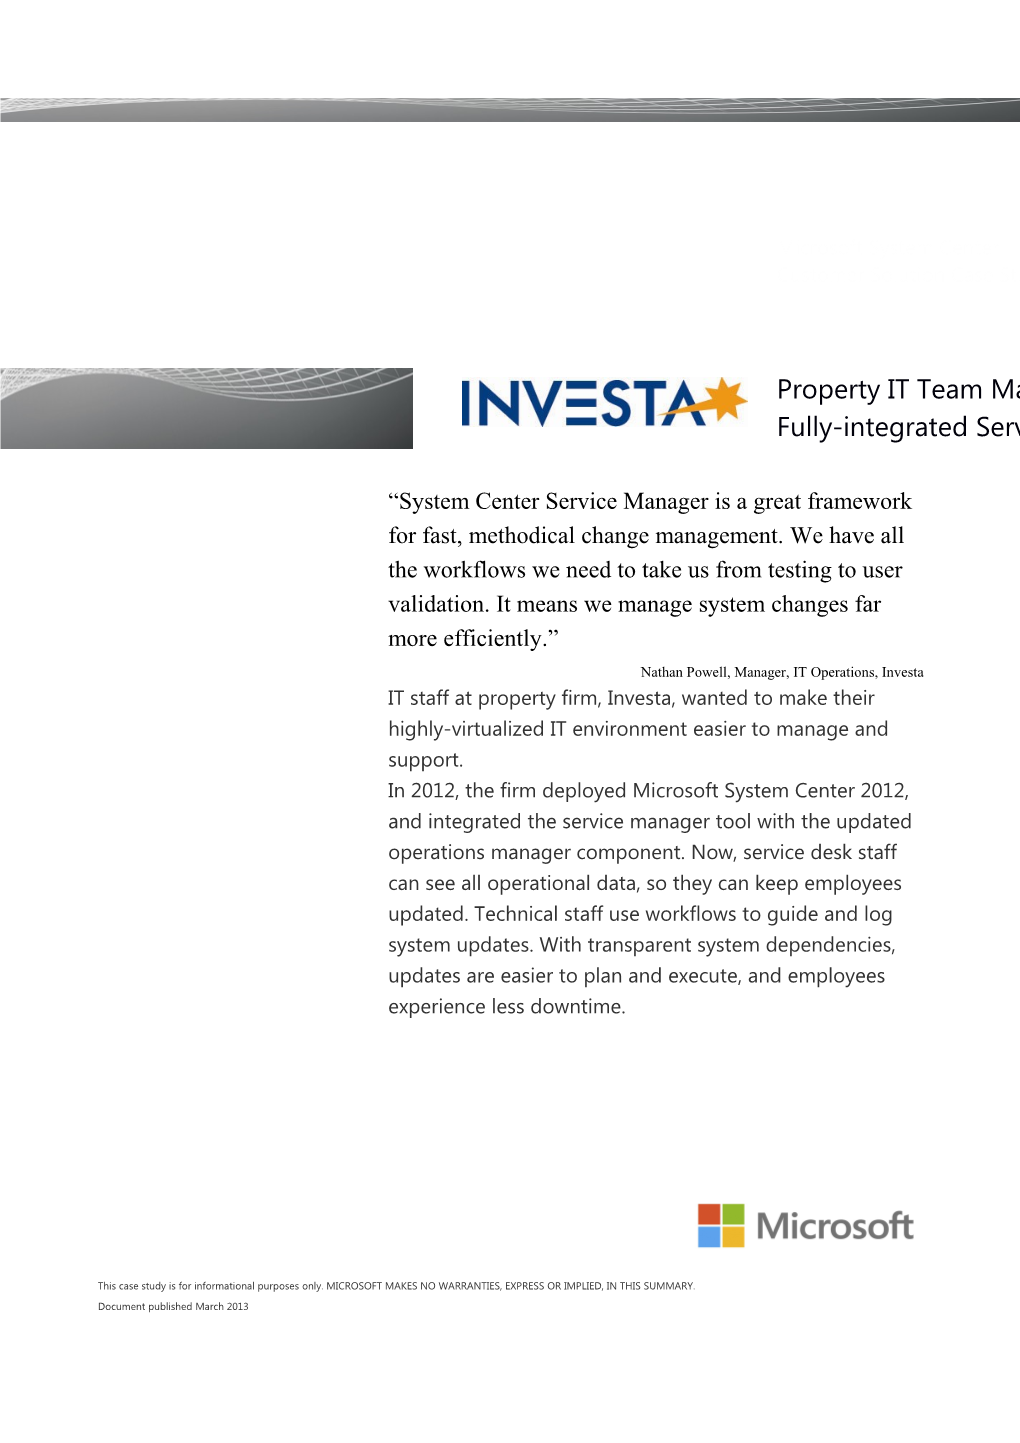 Writeimage CSB Property Company IT Team Simplifies Change Control, Reduces Outages With